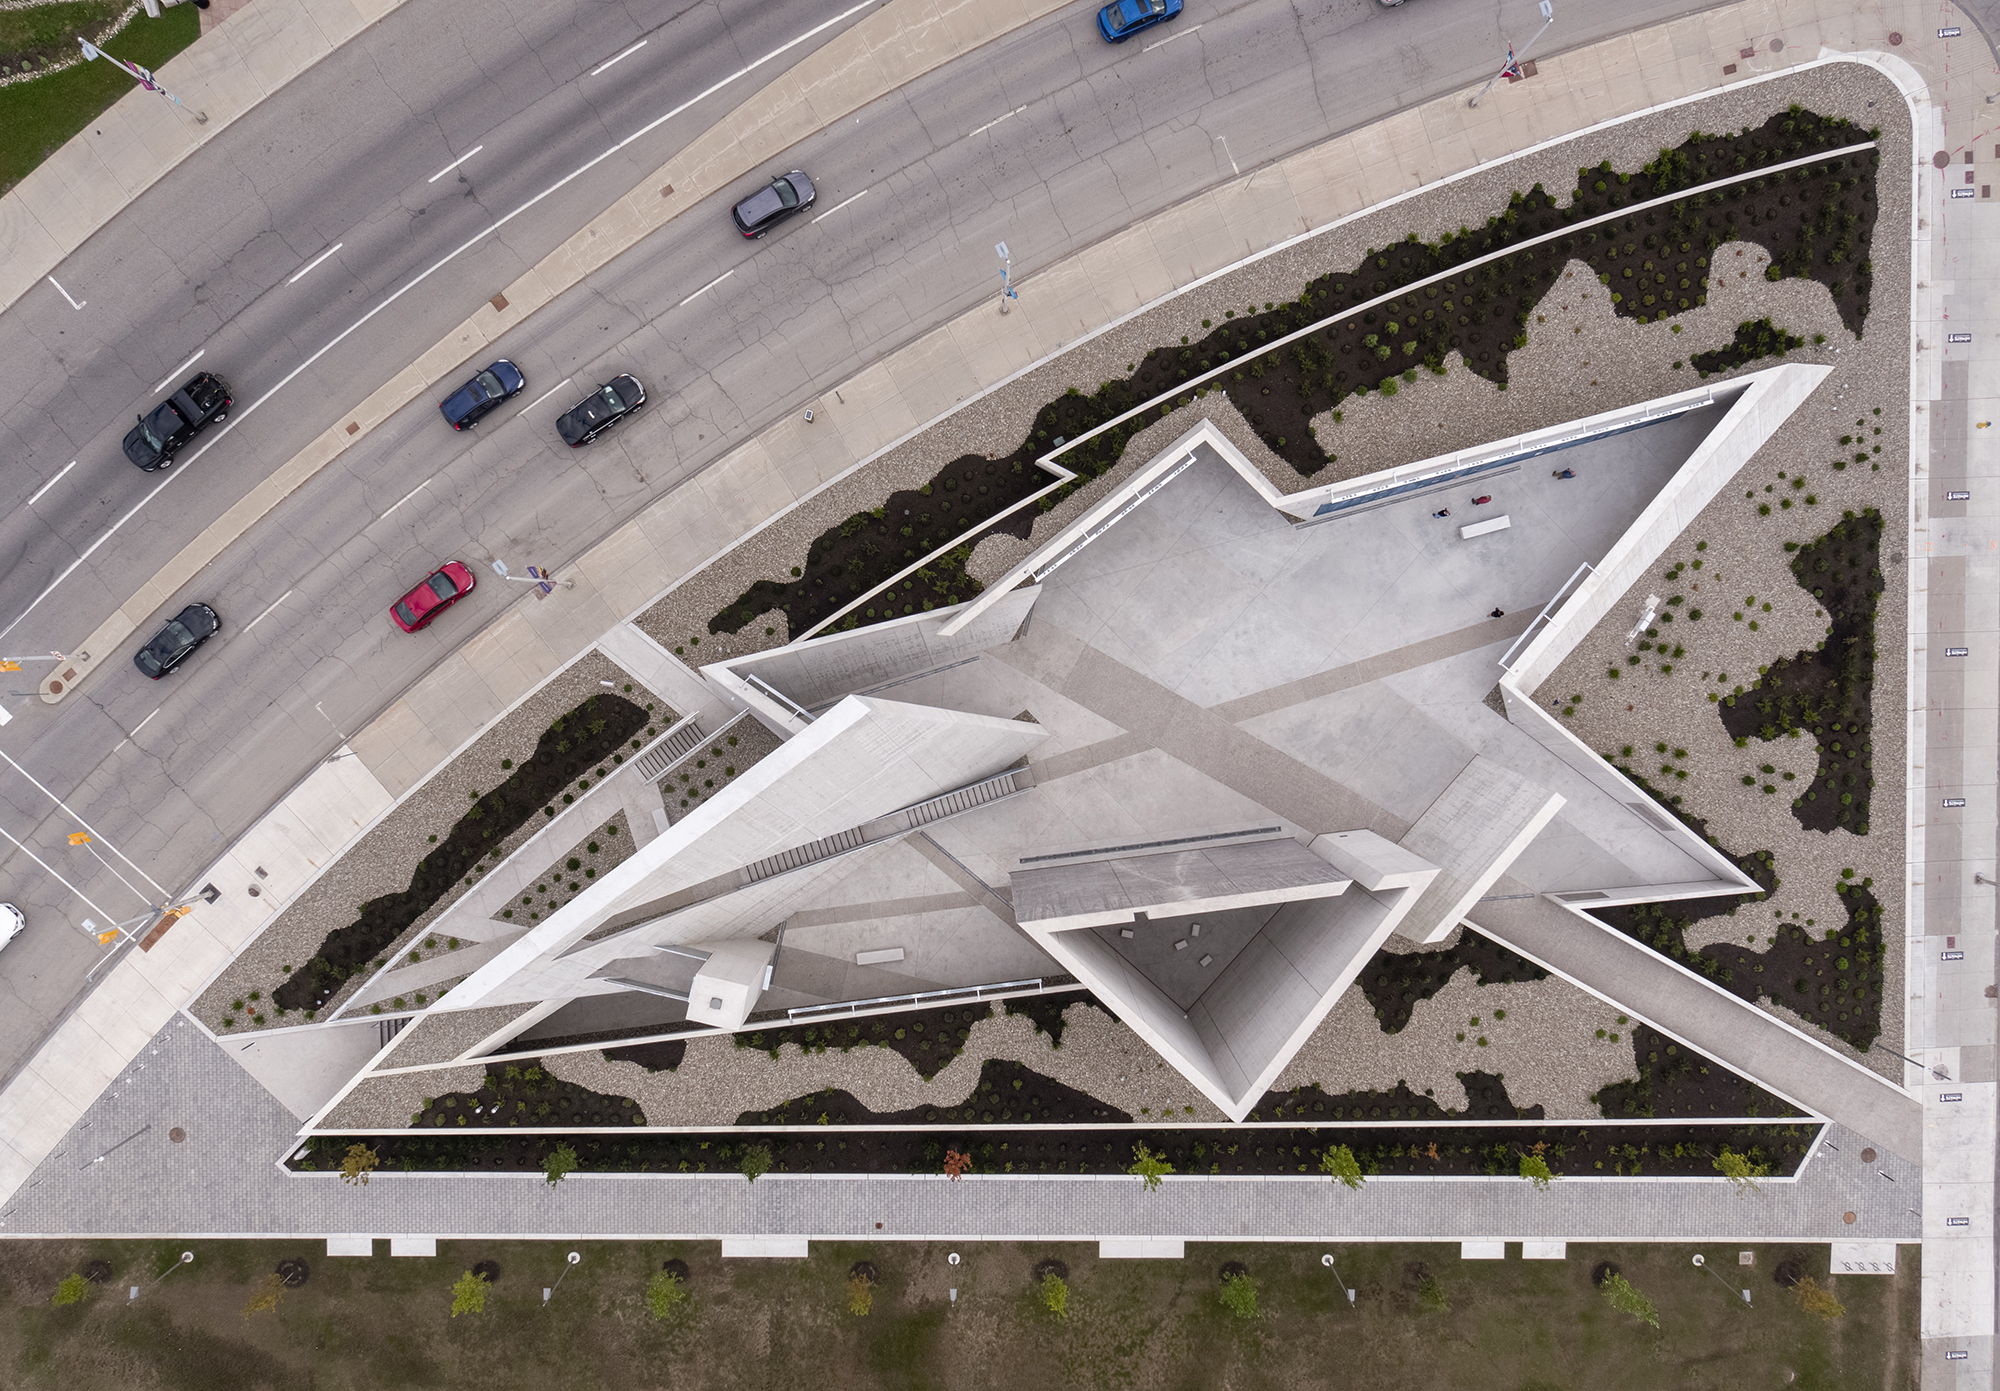 Canadian National Holocaust Monument by Studio Libeskind with Claude Cormier + Associés. Credit: Doublespace Photography.